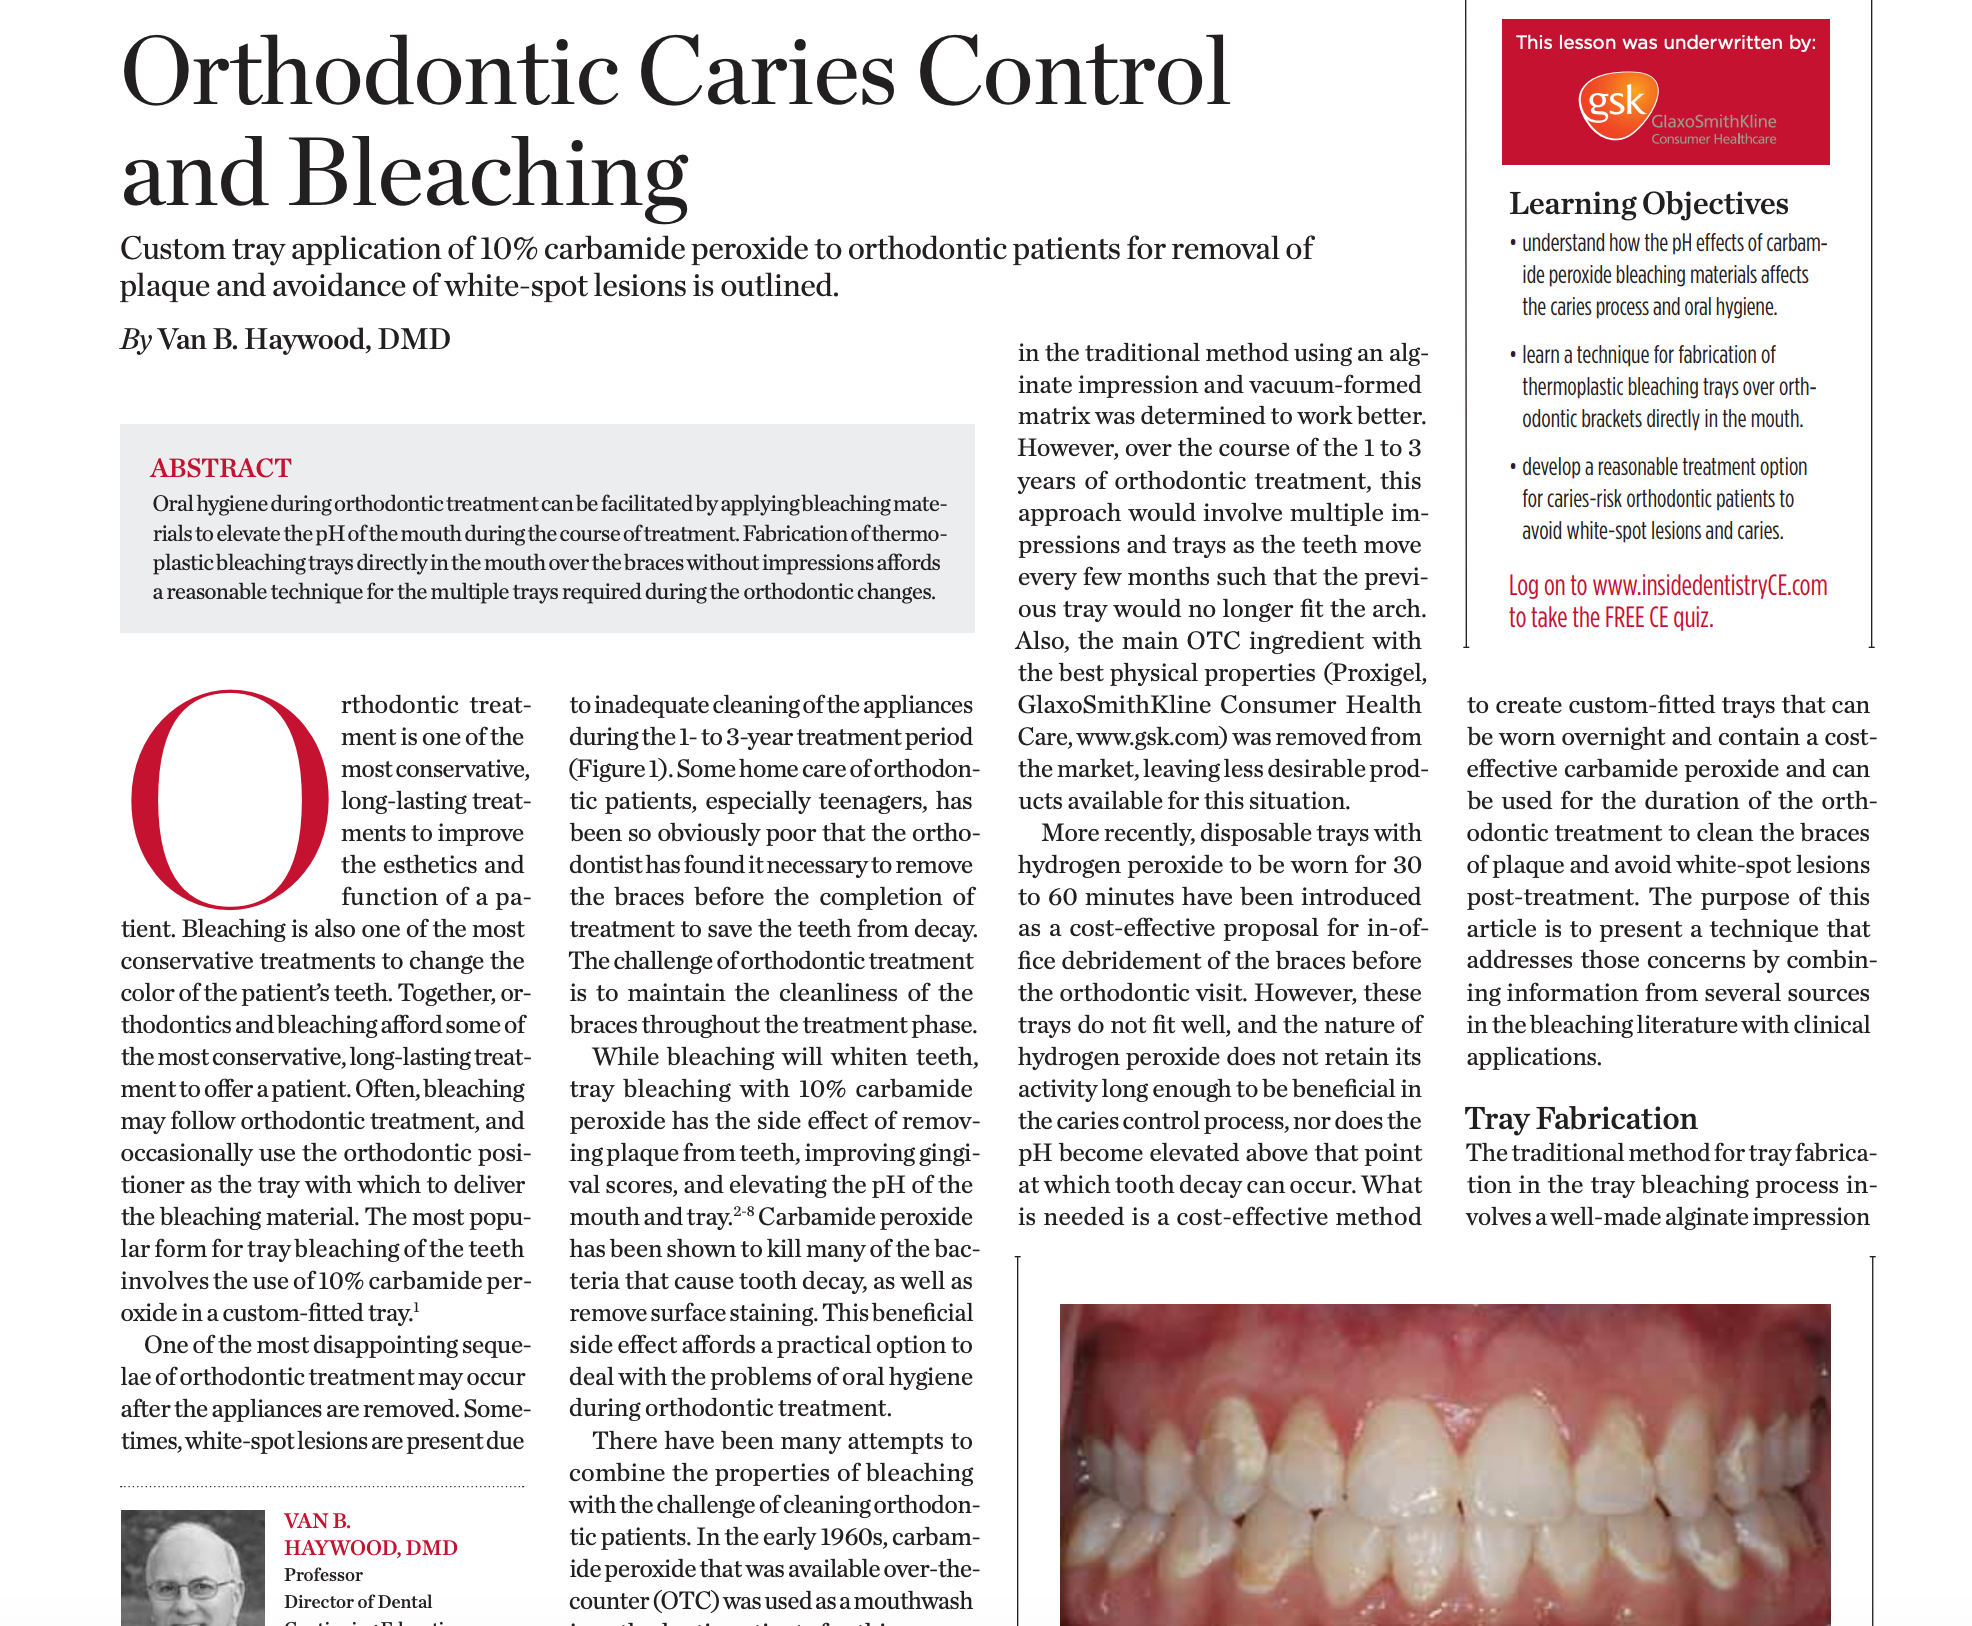 Orthodontic Caries Control and Bleaching